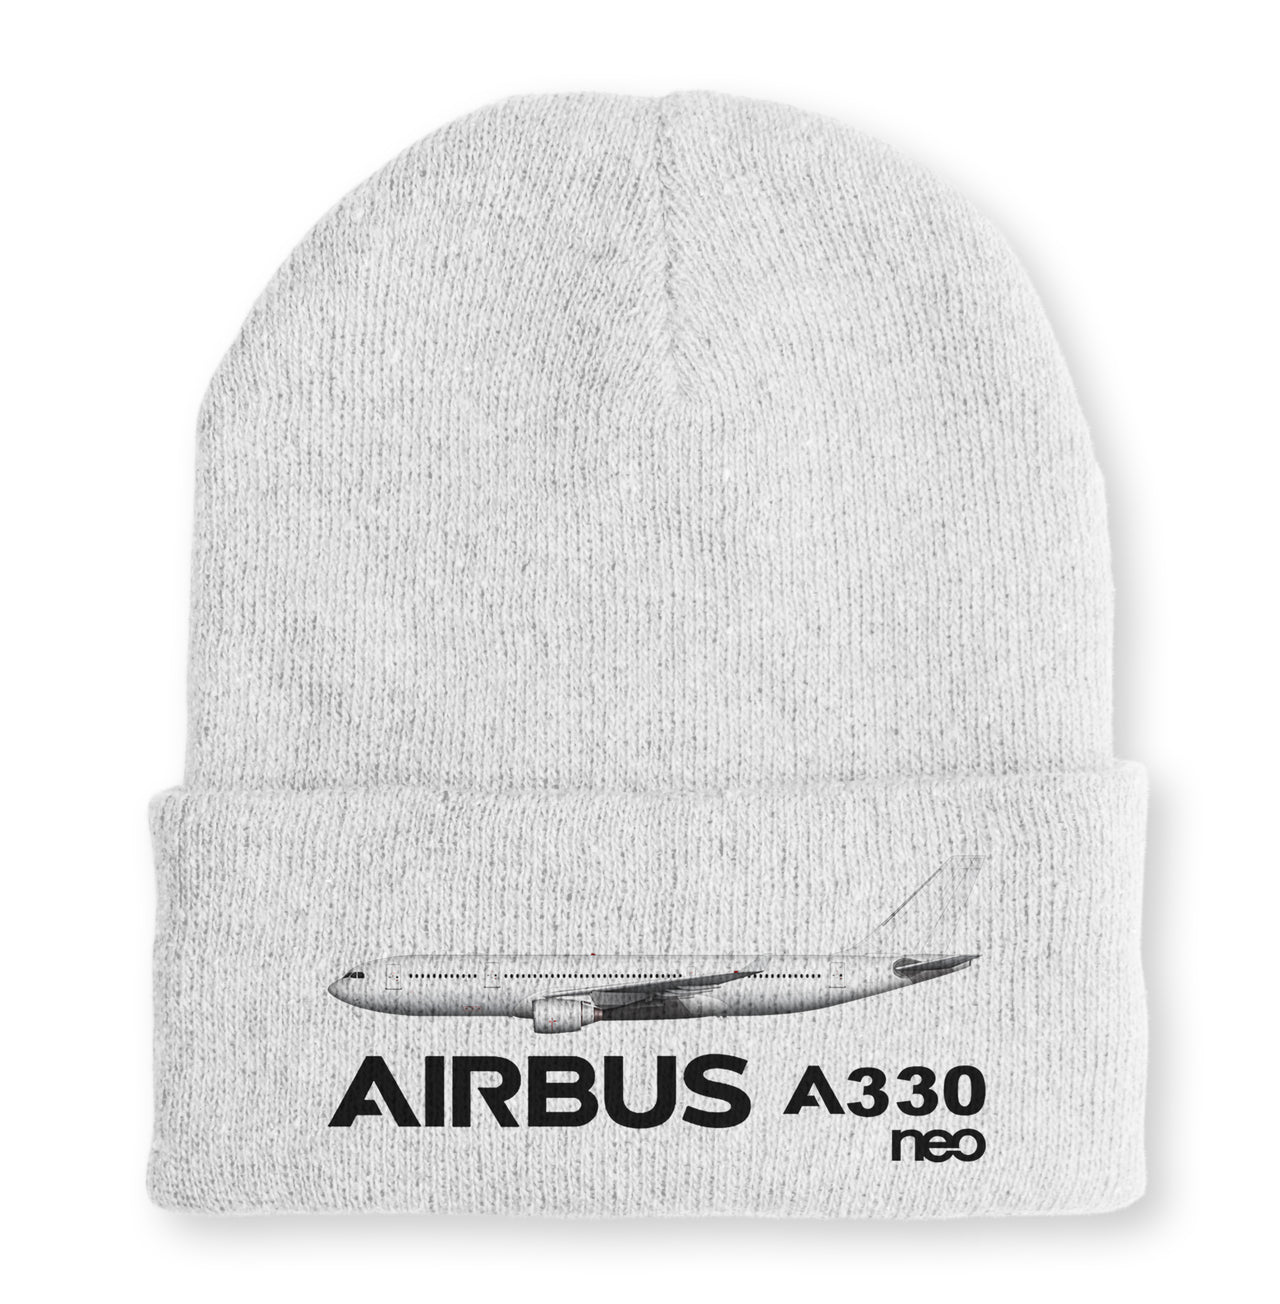 The Airbus A330neo Embroidered Beanies